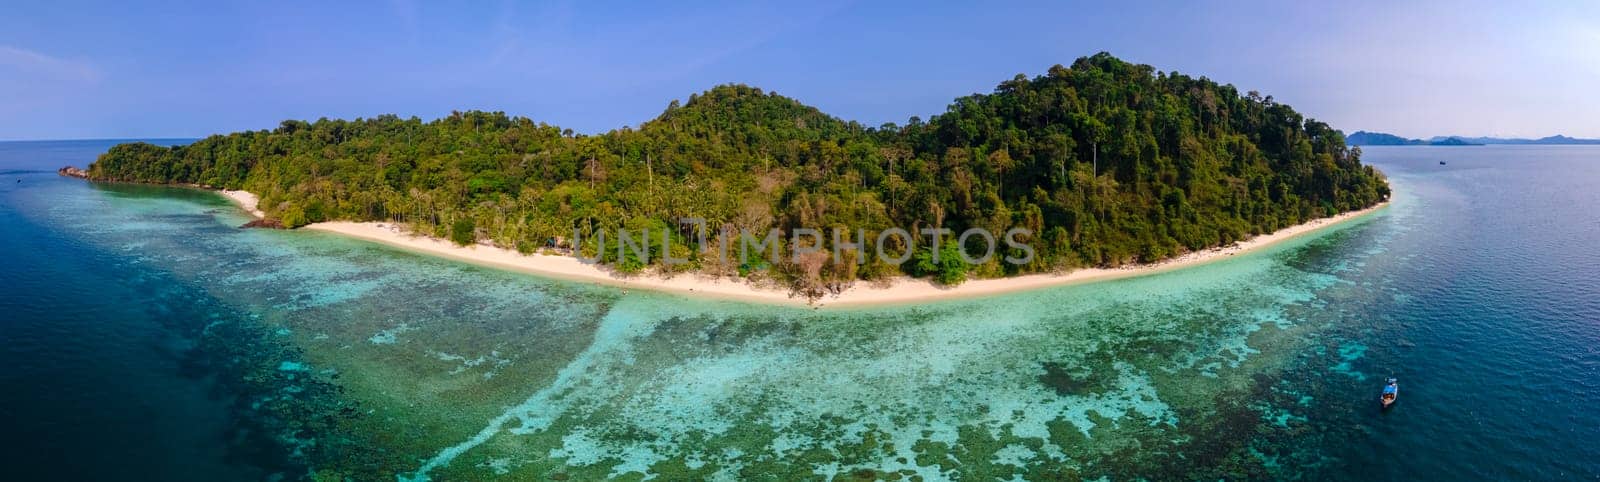 view at the beach of Koh Kradan island in Thailand, aerial view over Koh Kradan Island Trang voted in 2023 as the nr 1 beach in the world